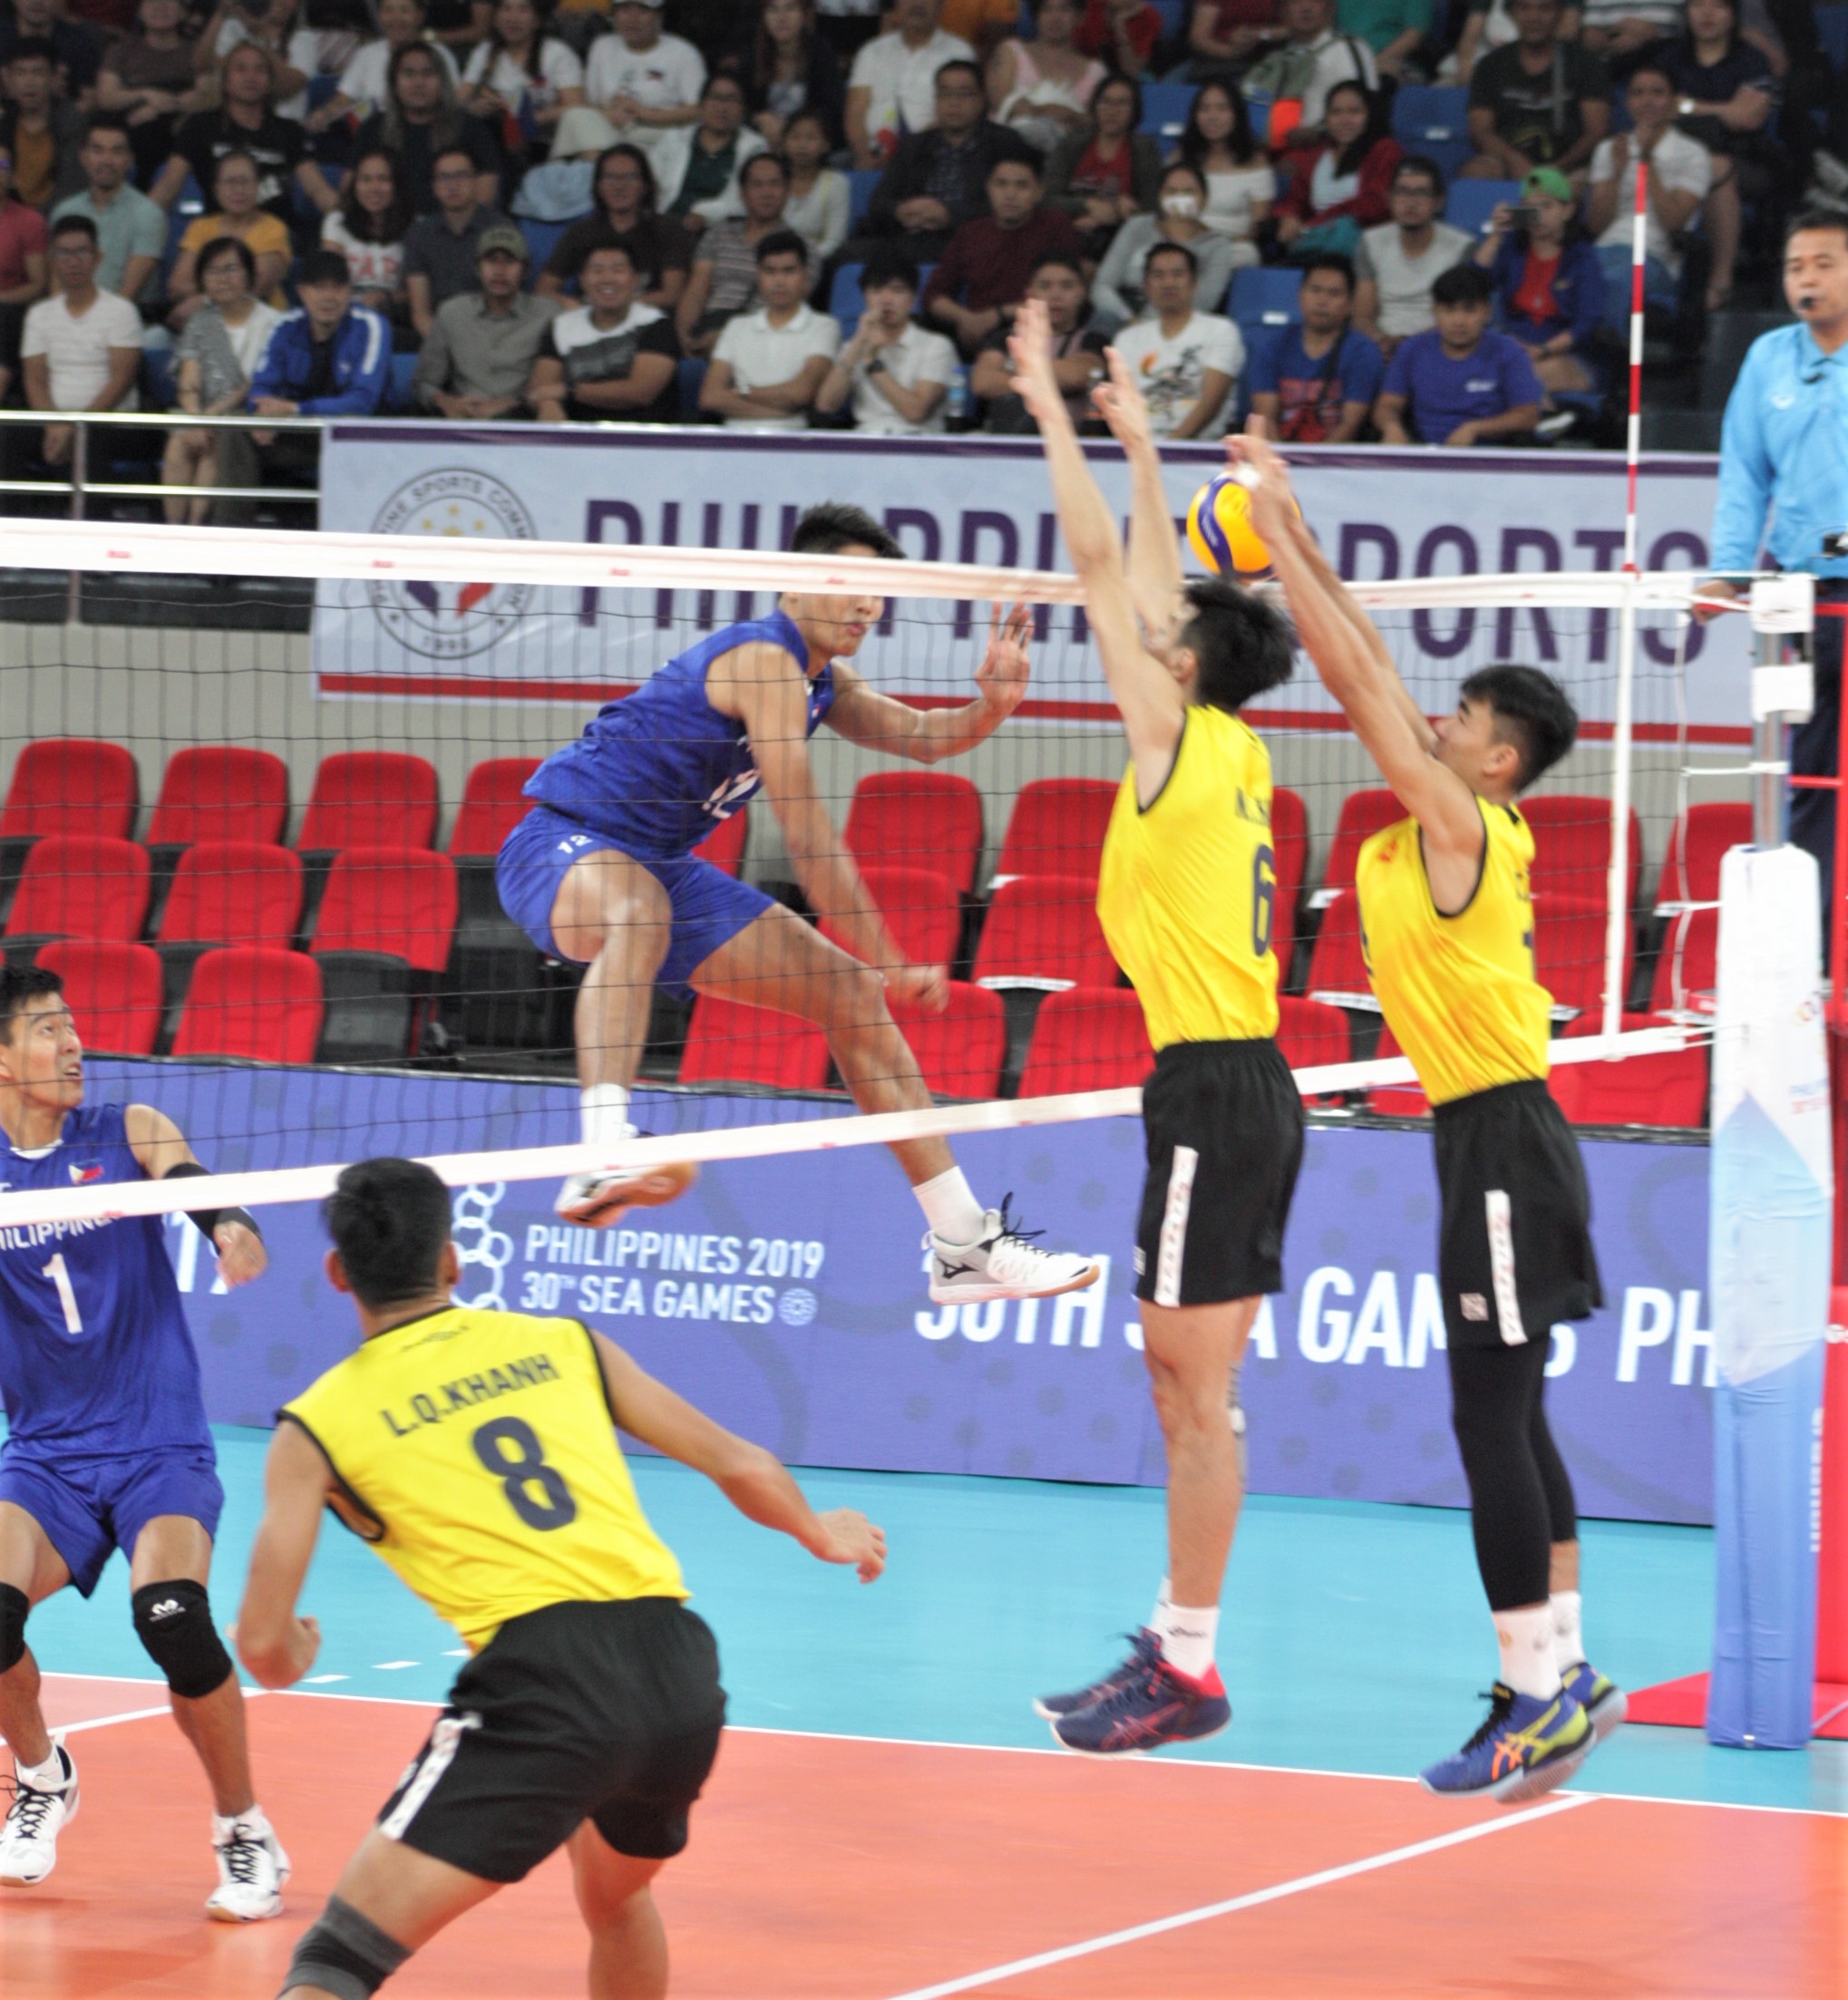 UNBEATEN PHILIPPINES AND INDONESIA SEAL SEMI-FINAL SPOTS AT 30TH SEA GAMES MEN’S VOLLEYBALL